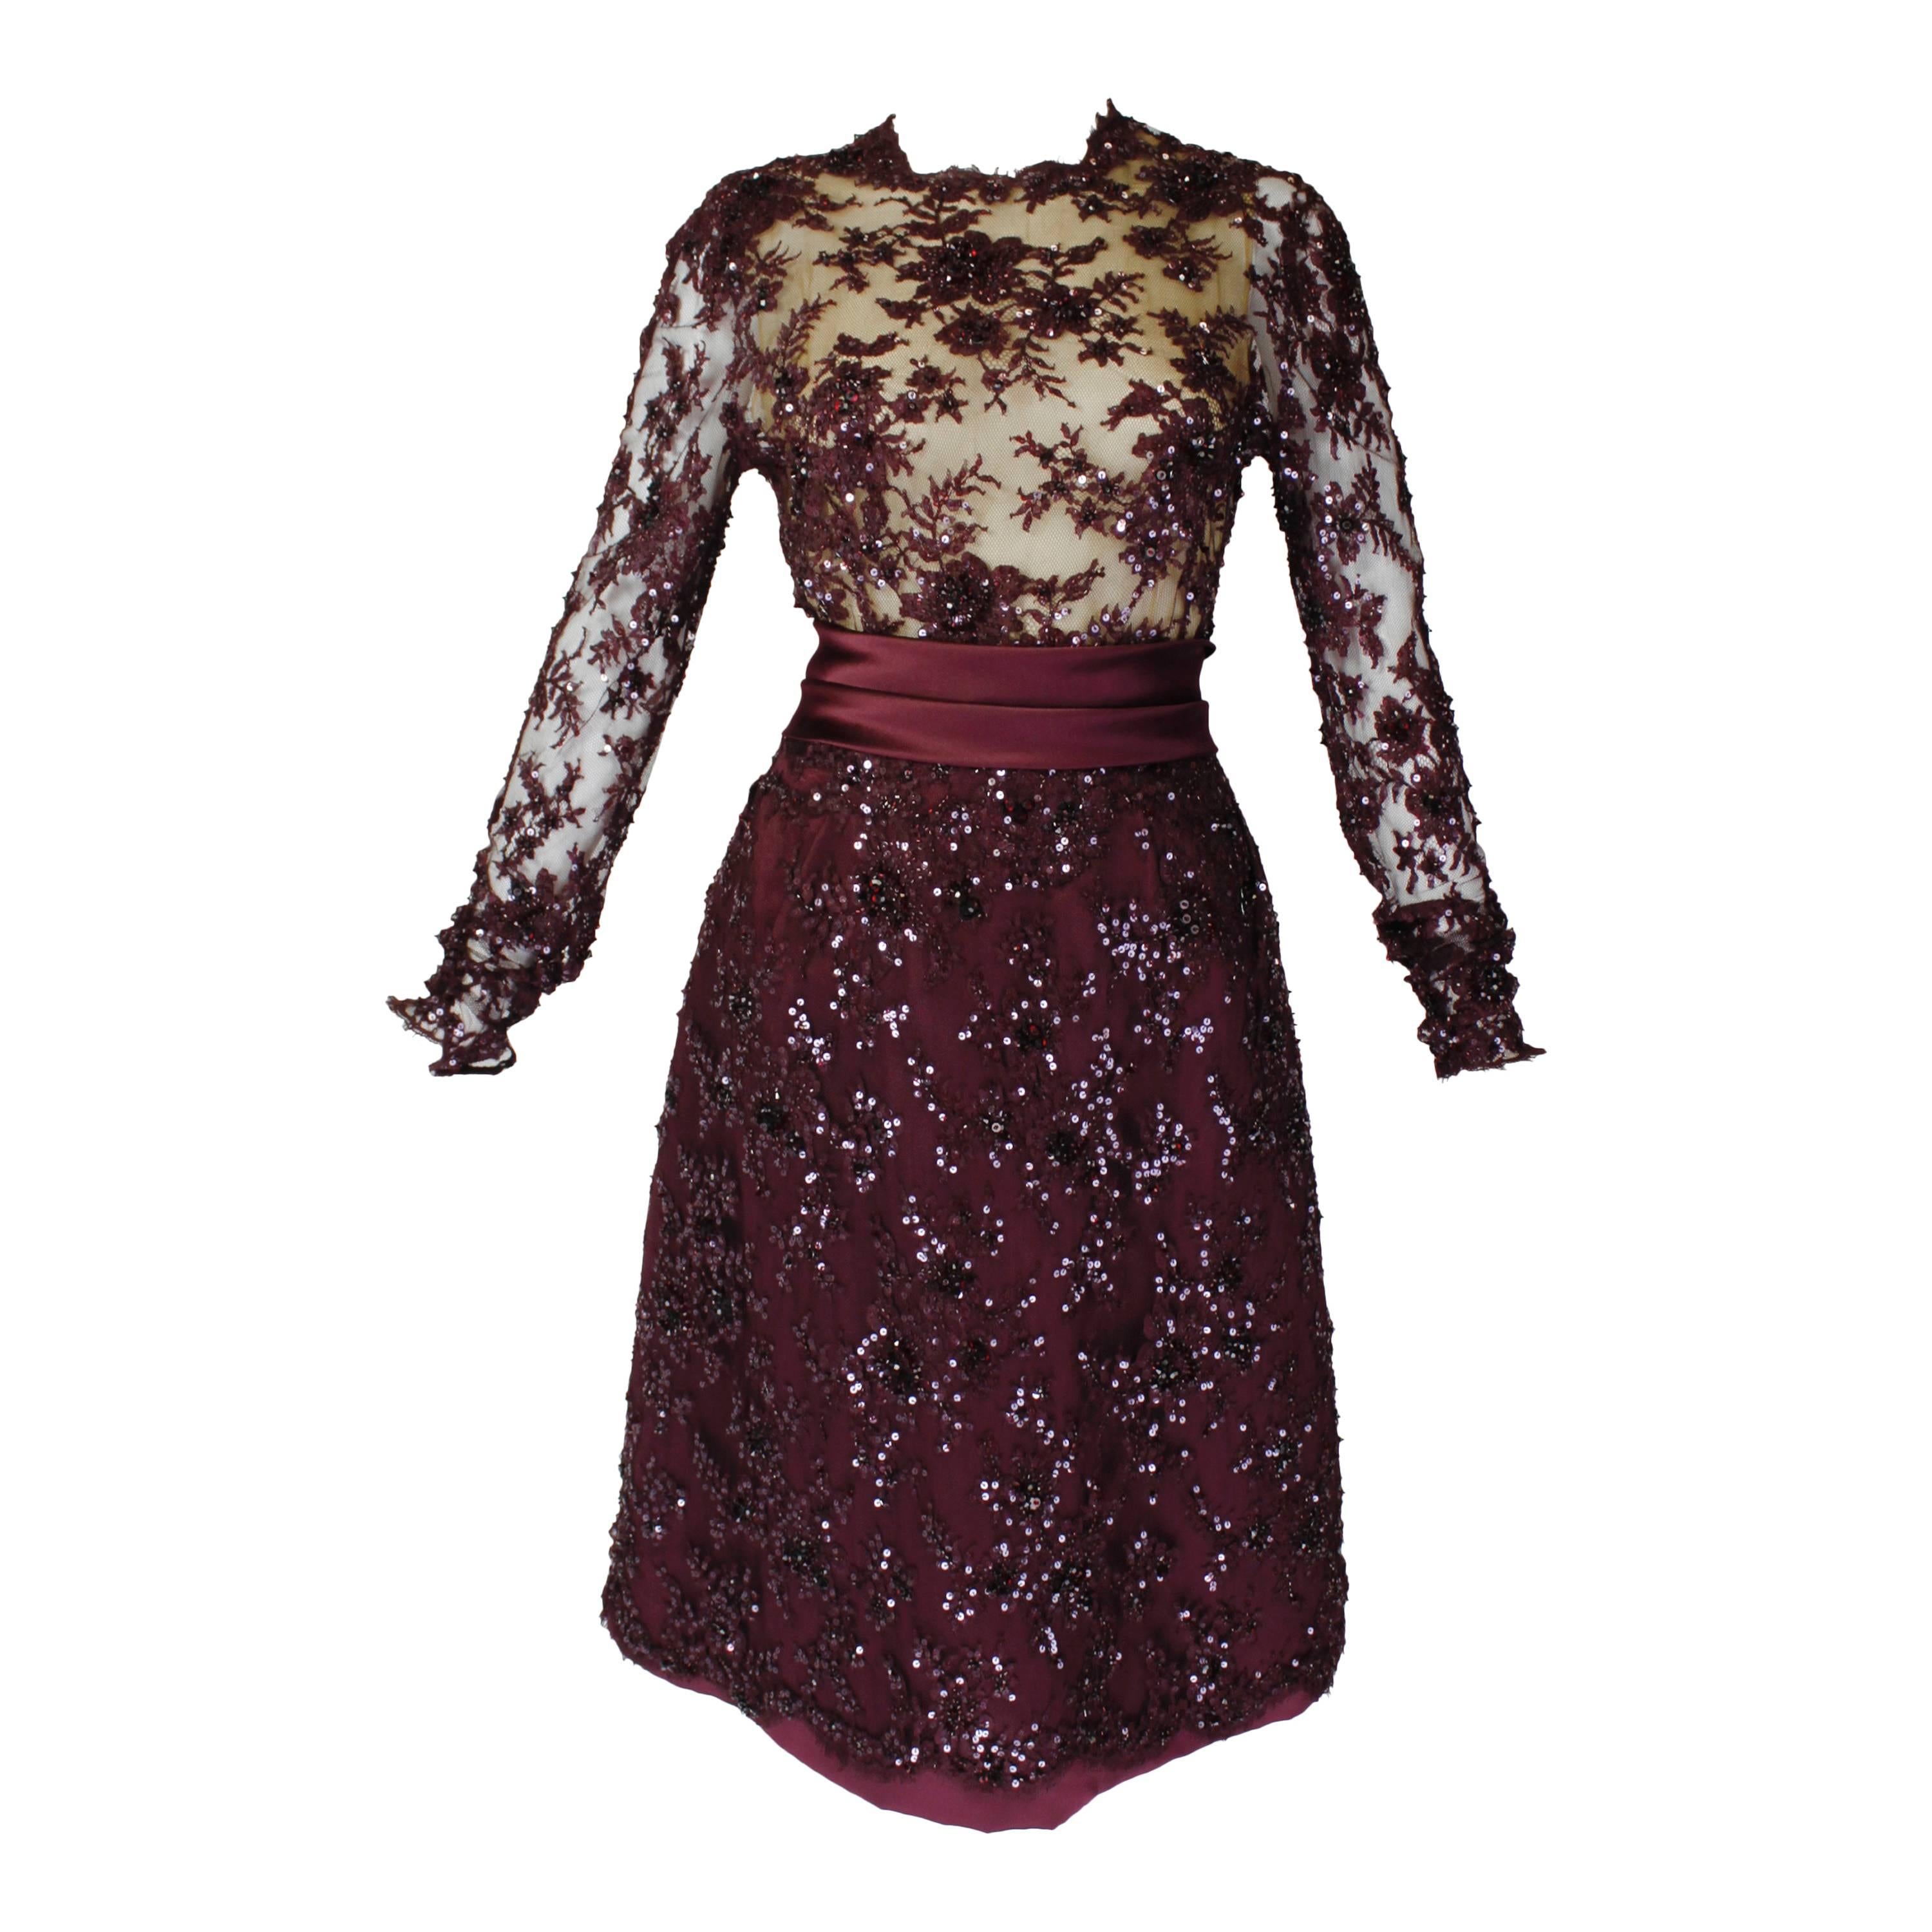 John Anthony Ruby Floral Lace Cocktail Dress with Rhinestone Details For Sale